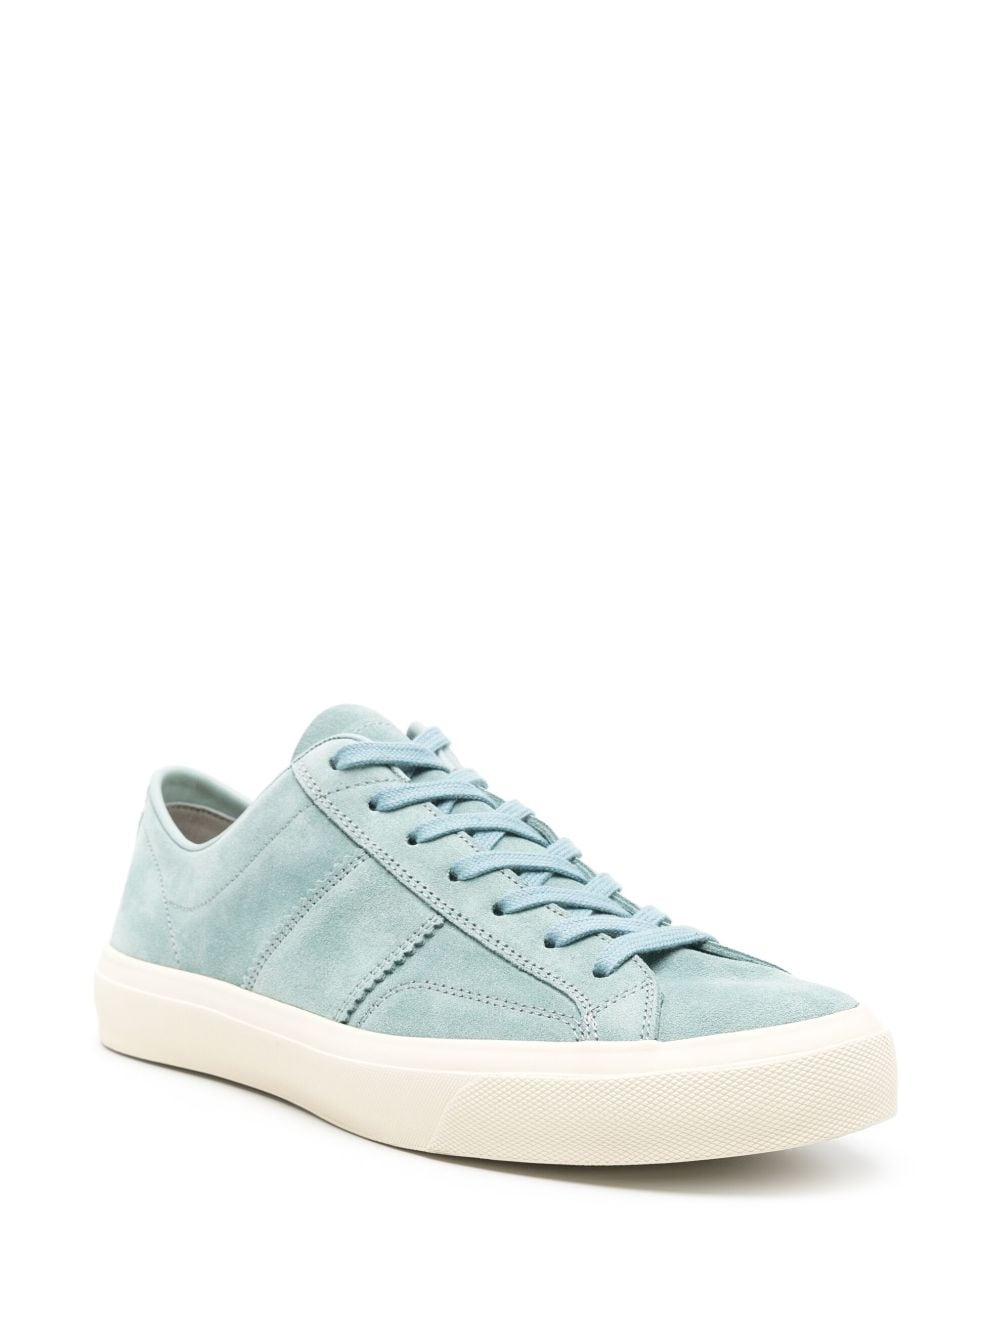 TOM FORD TOM FORD CAMBRIDGE SUEDE SNEAKER - Blauw